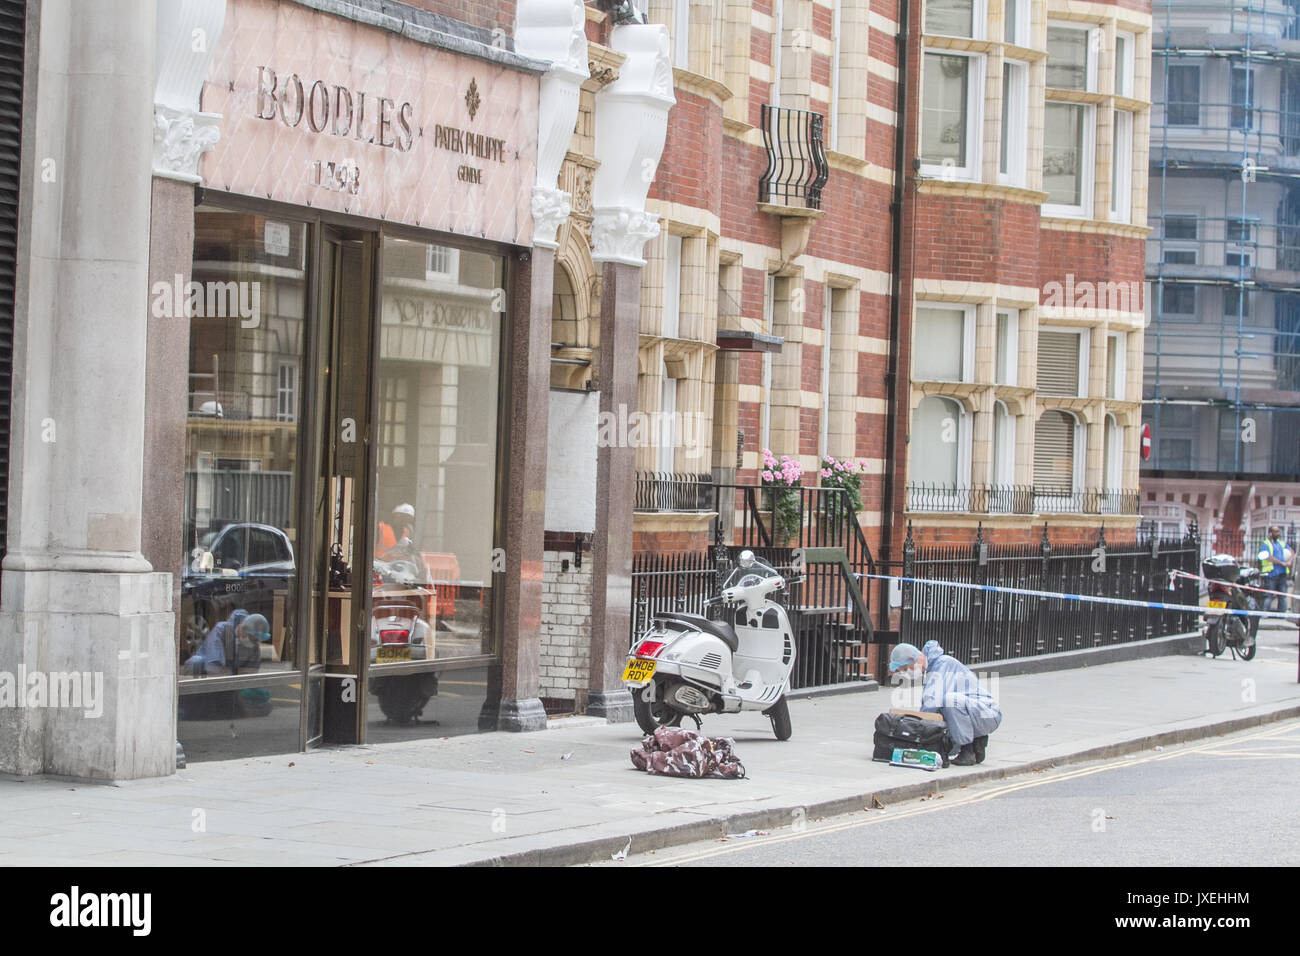 London, UK. 16th Aug, 2017. Police cordon off the crime scene  in Basil  street  as a forensic officers  carry out an investigation into Boodles jewellery store raid in Knightsbridge by armed motorcycle gang Credit: amer ghazzal/Alamy Live News Stock Photo